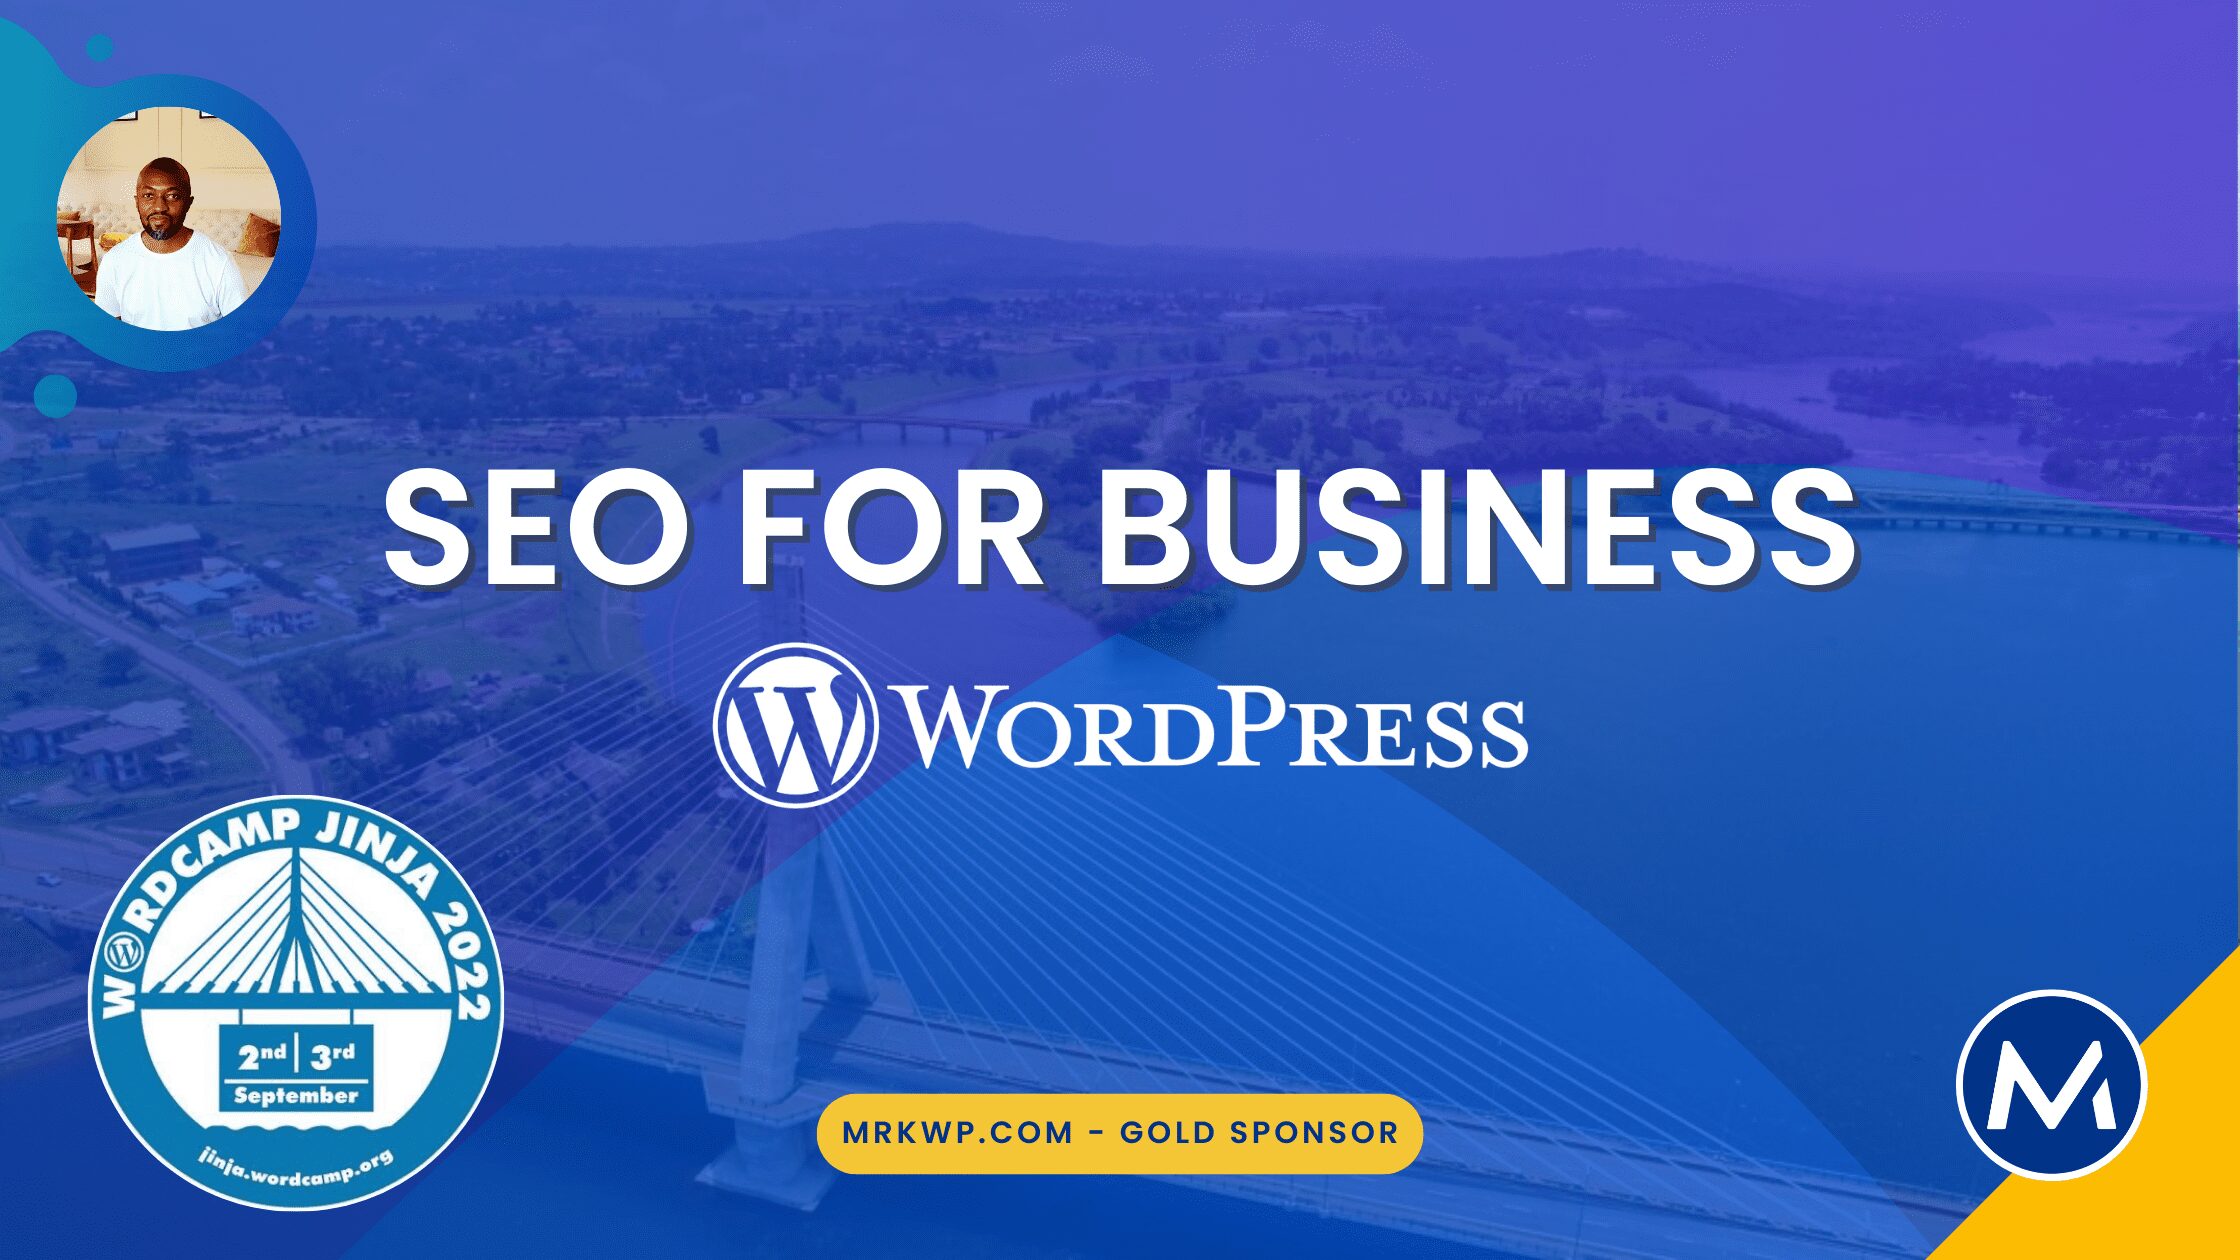 SEO for business at WordCamp Jinja 2022